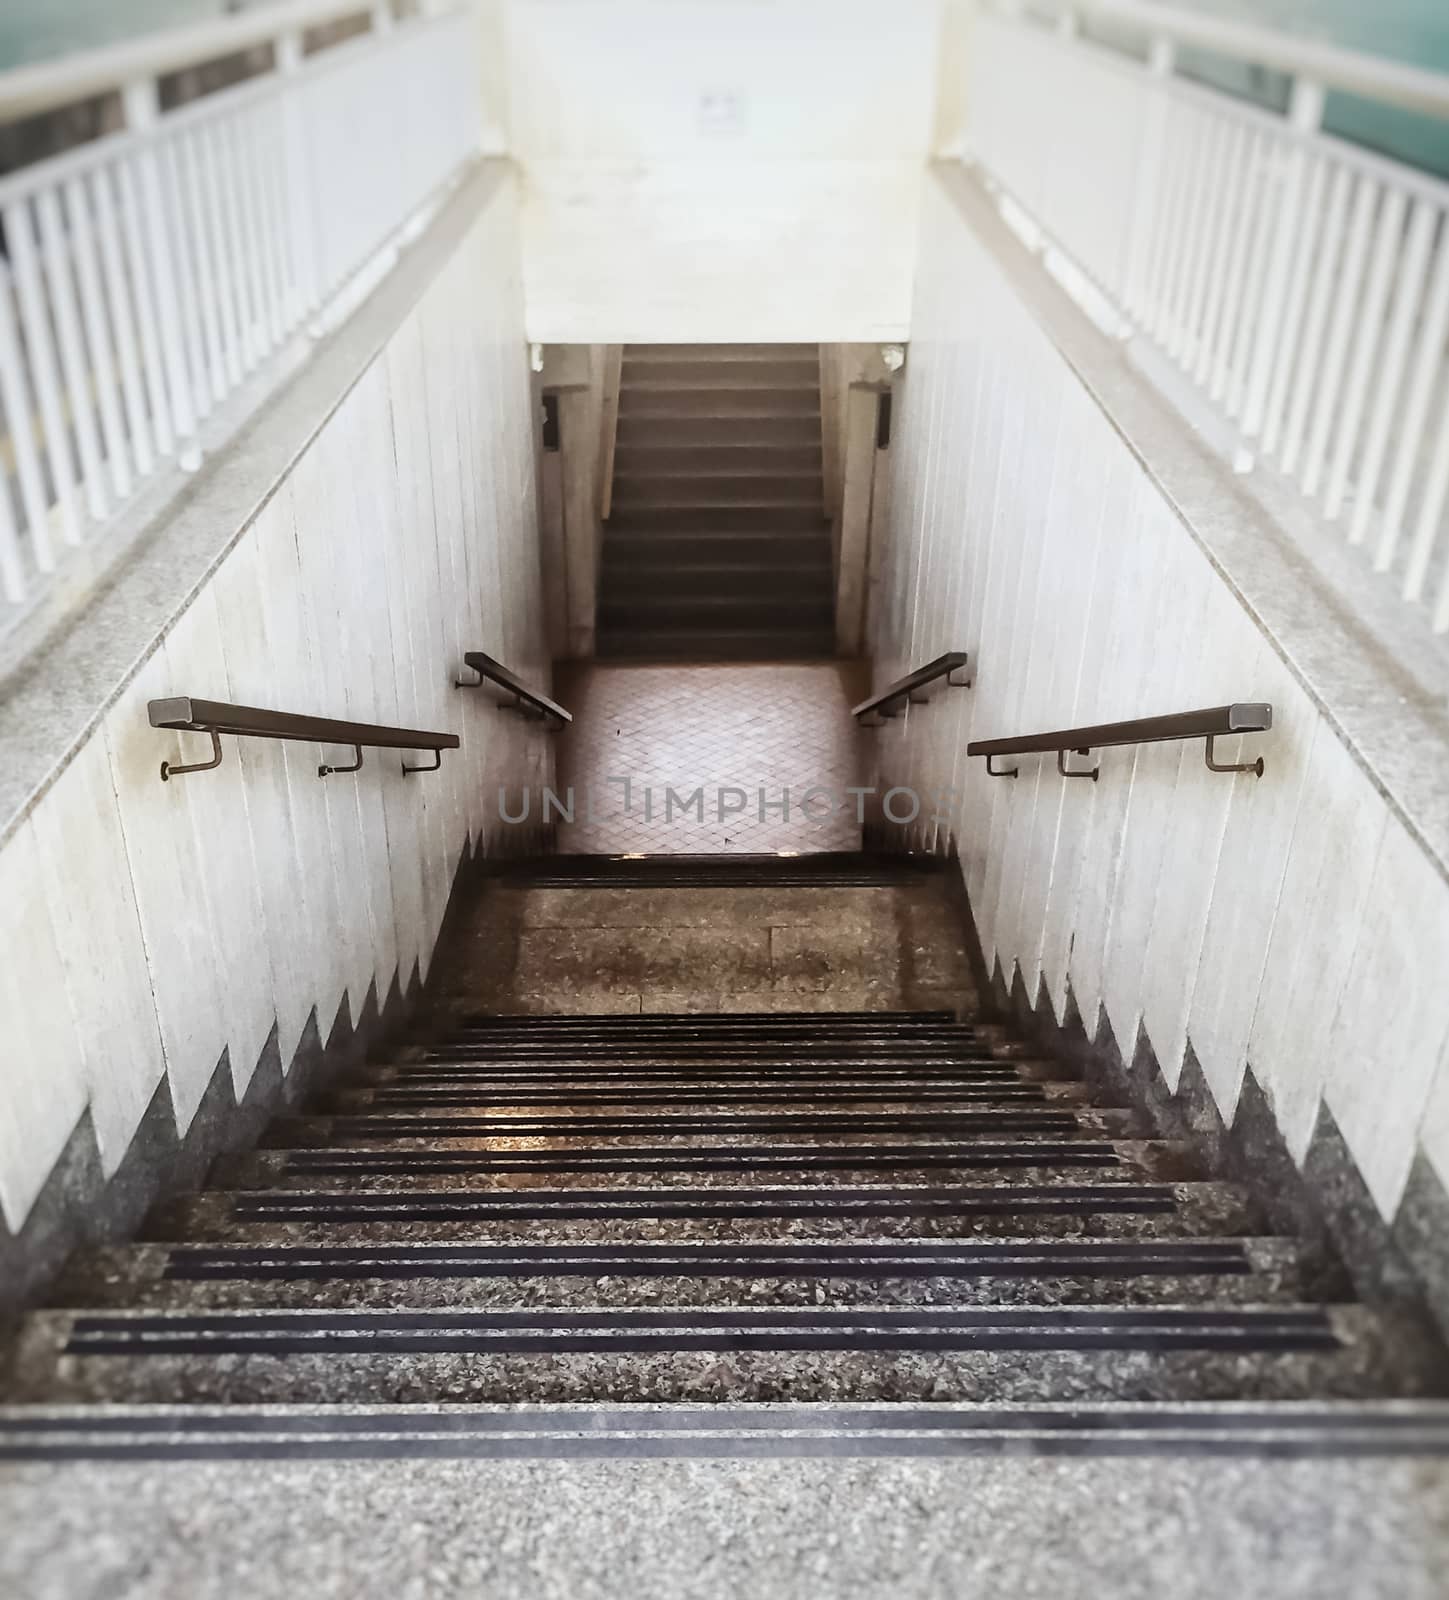 perspective view of a staircase with iron handrail and with a white balustrade